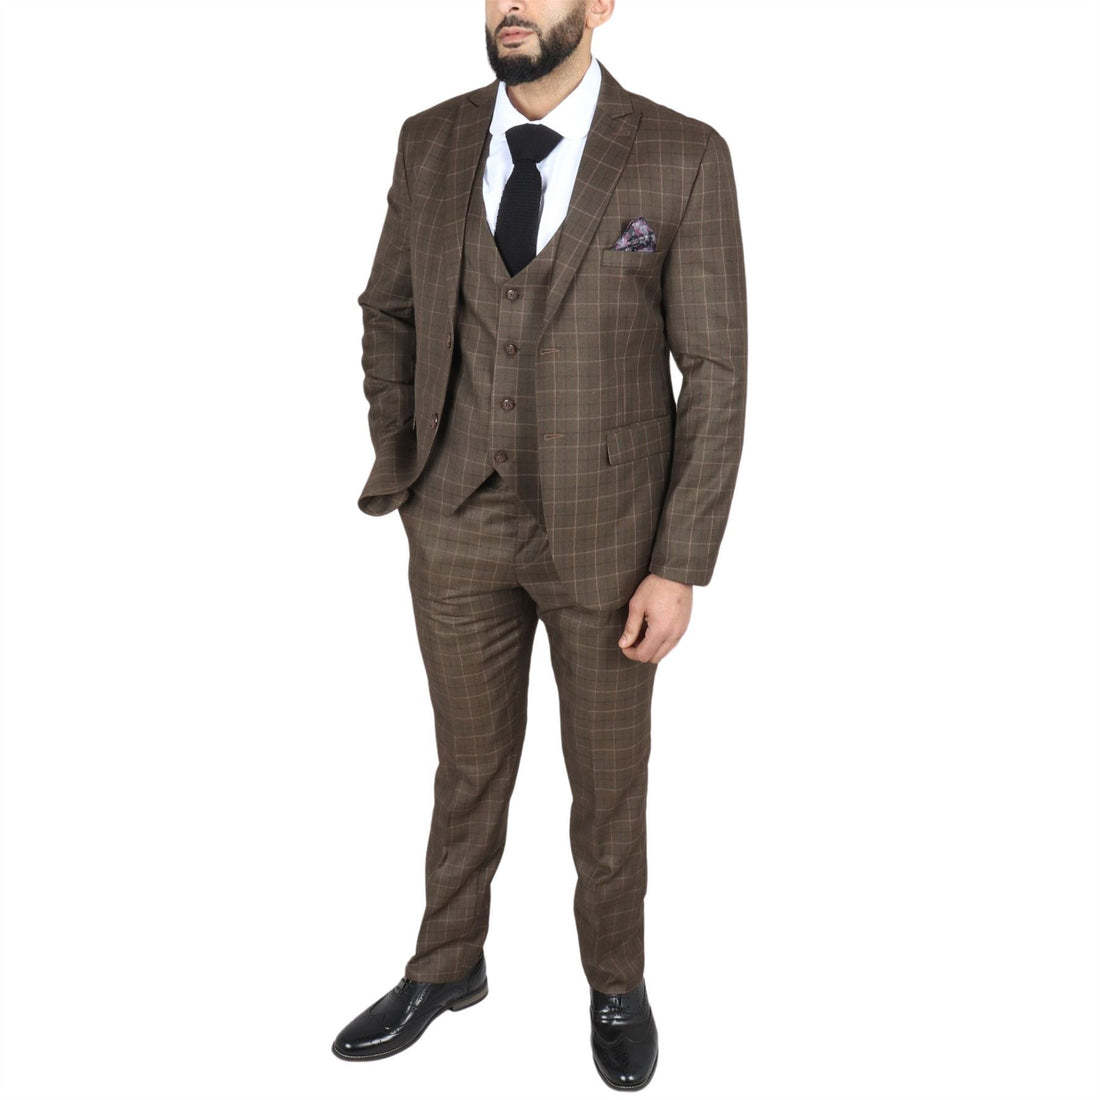 Men's Brown Suit Prince Of Wales Check Tailored Fit 3 Piece Formal Dress